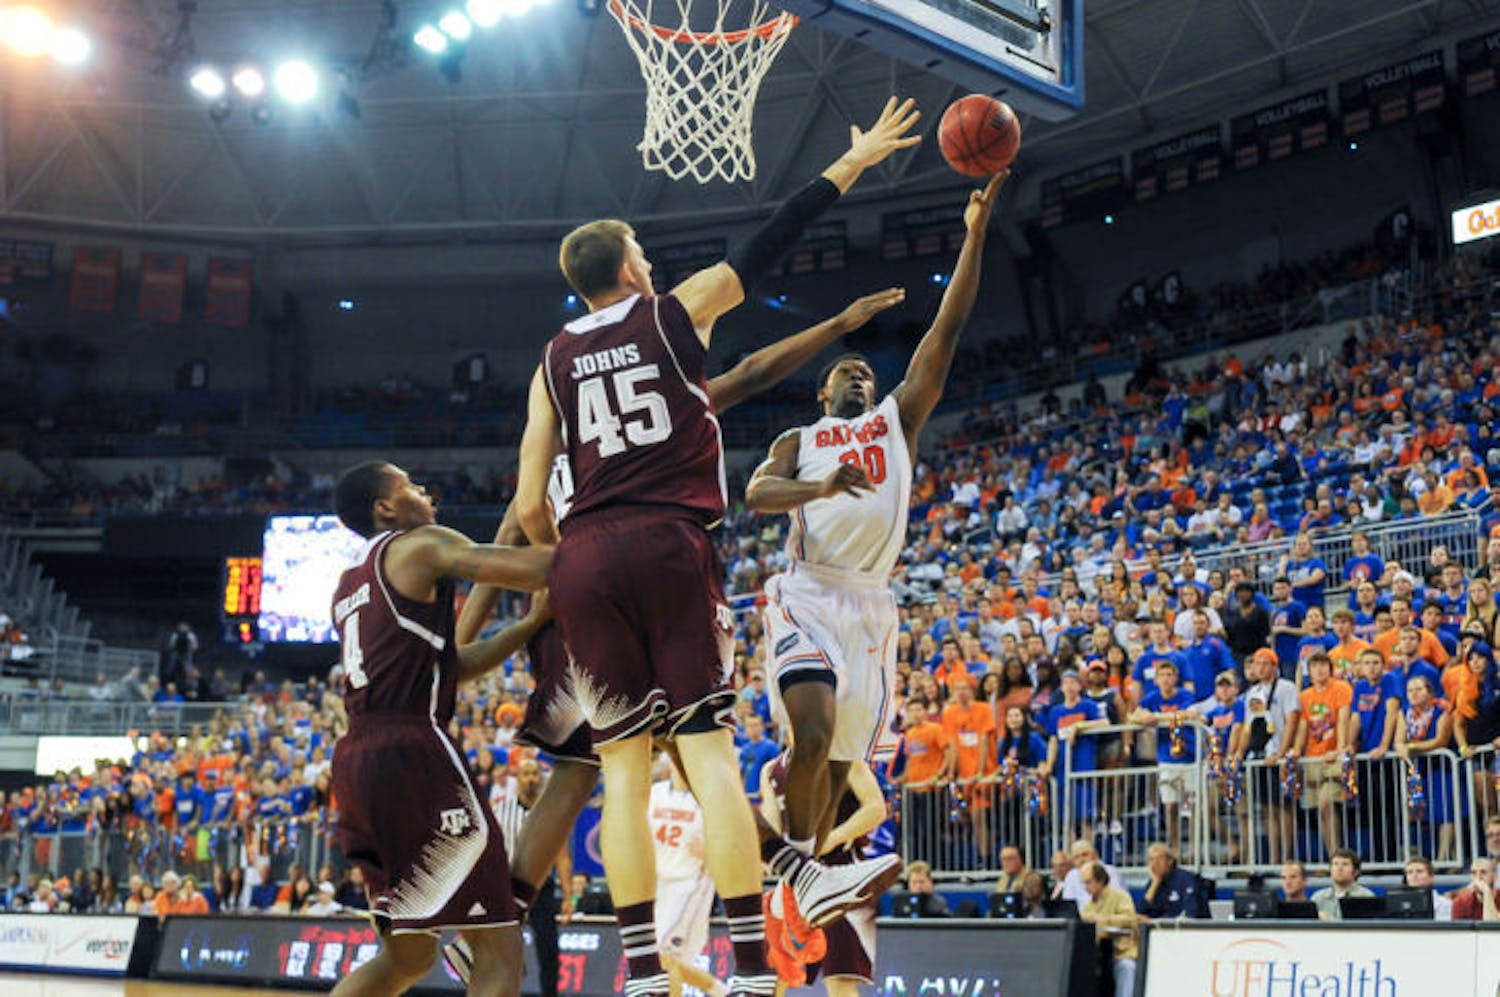 Michael Frazier II attempts a layup during Florida’s 69-36 win against Texas A&amp;M on Feb. 1 in the O’Connell Center.&nbsp;